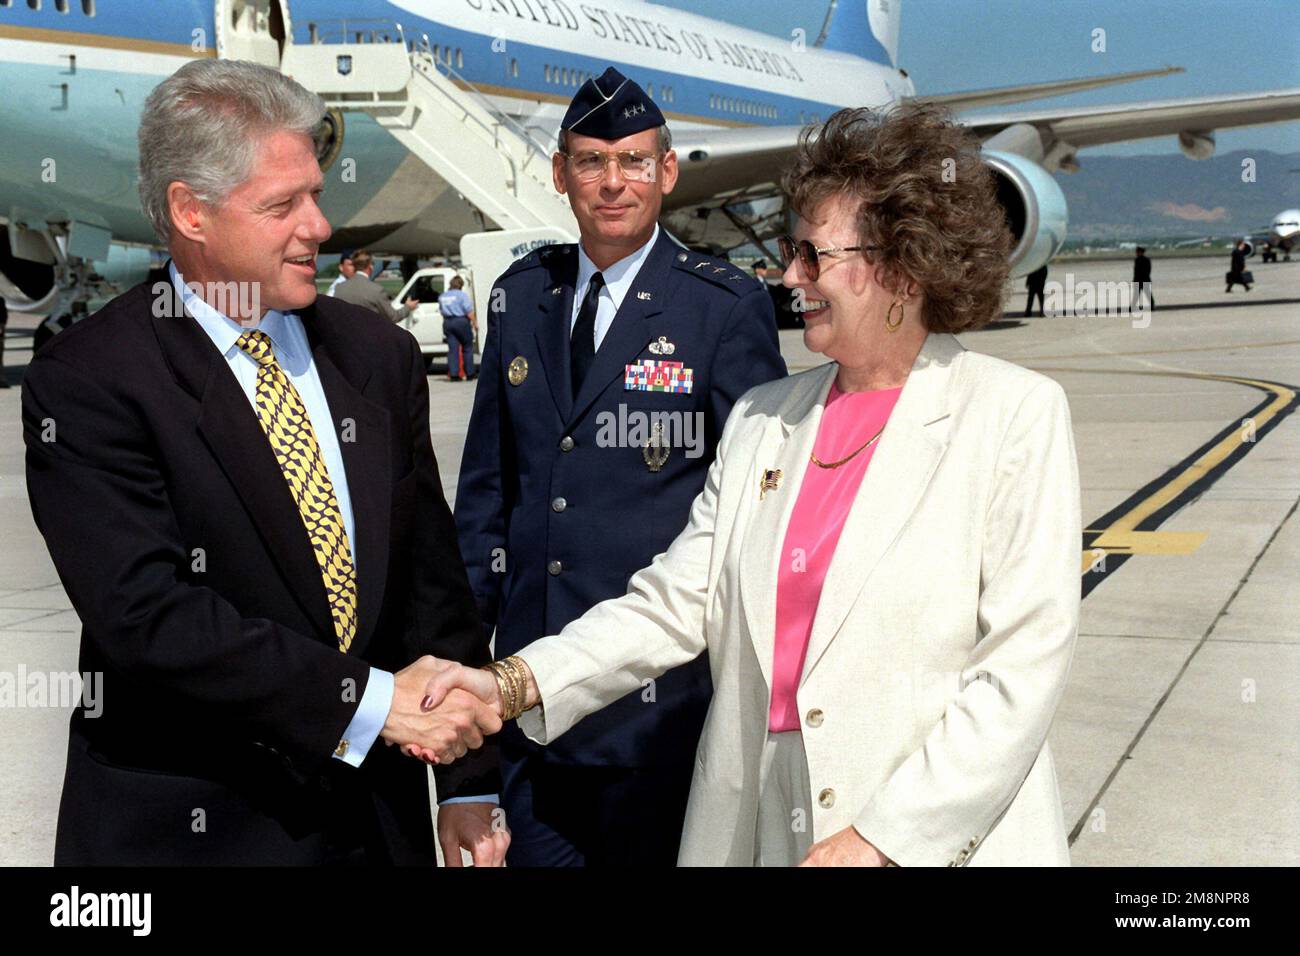 President William Jefferson Clinton shakes hands with Mrs. Becky Lord, wife of US Air Force Lieutenant General Lance Lord (Center), Vice Commander, Air Force Space Command, Peterson Air Force Base, Colorado. This event took place on the Peterson AFB flight on June 2nd, 1999. Air Force One is parked on the flight line in the background. Base: Peterson Air Force Base State: Colorado (CO) Country: United States Of America (USA) Stock Photo